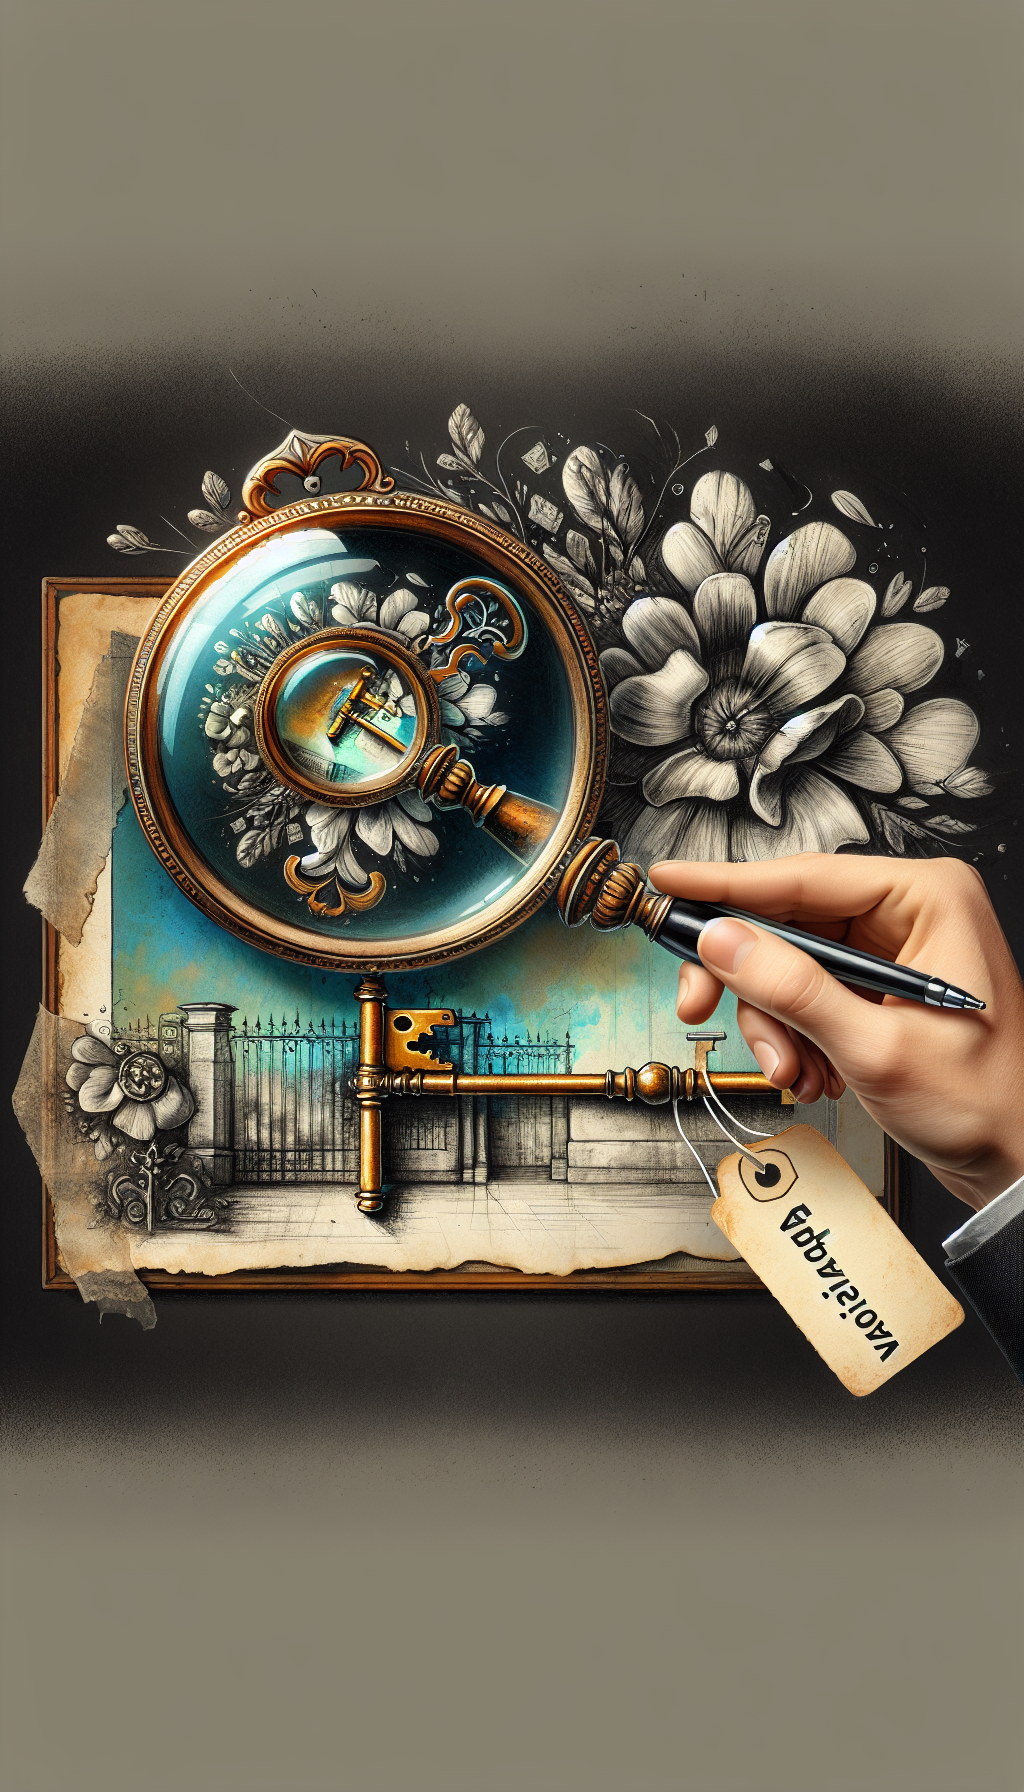 An intricate magnifying glass hovers above a classic, ornate key; through its lens, we glimpse a faded photo transitioning into a vibrant, detailed painting of an antique piece, symbolizing its authenticated value. A tag labeled "Appraisal" dangles from the key, mixing sketches with watercolor finishes to depict the blend of history and the art of antique valuation.